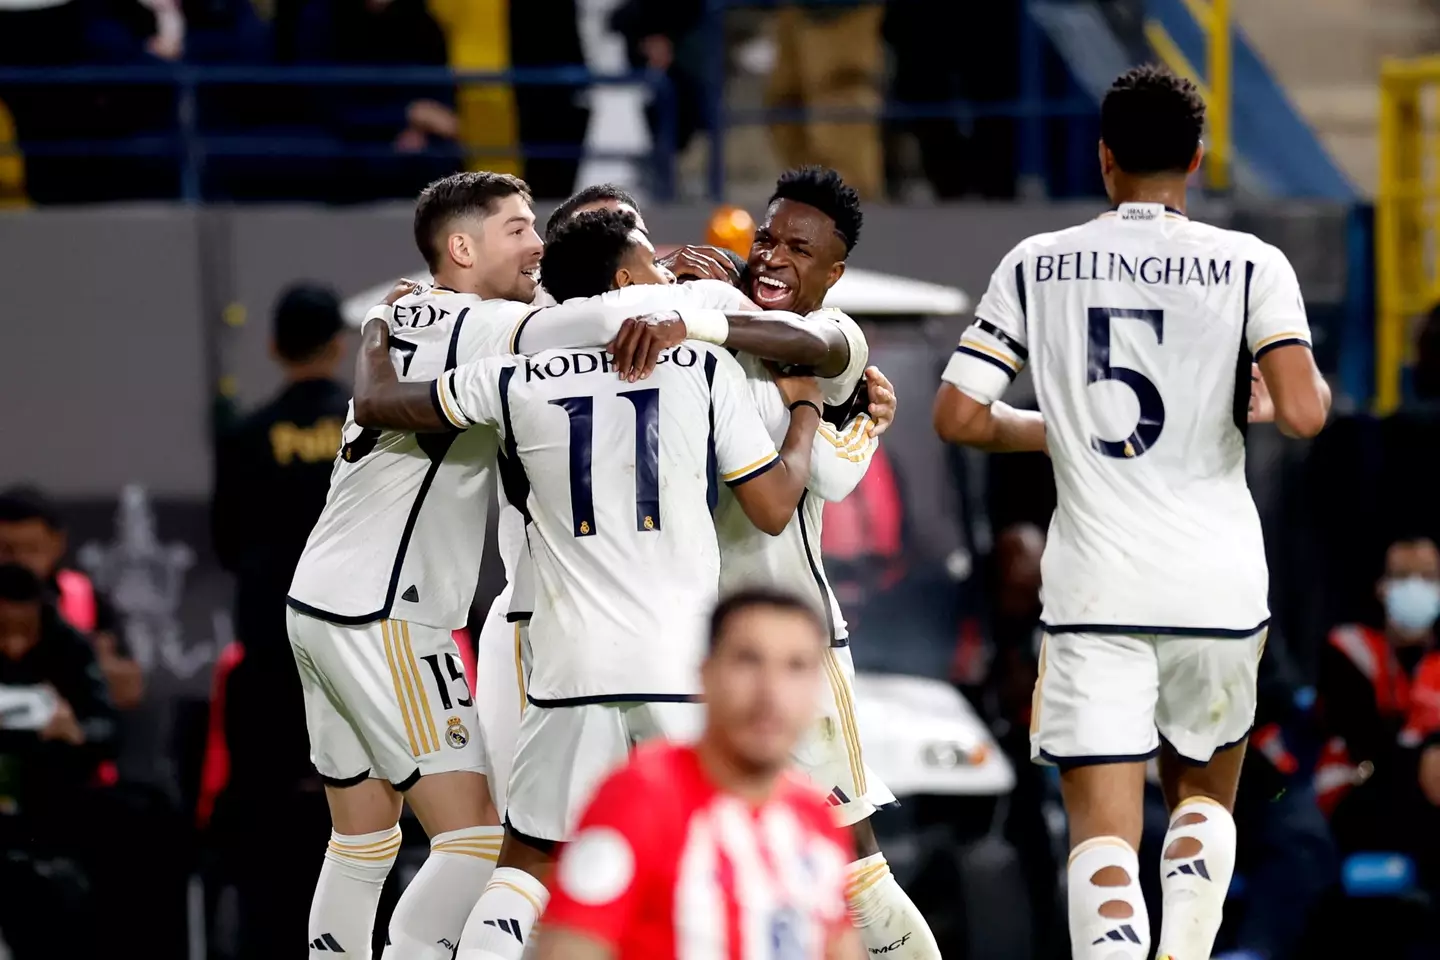 Real Madrid celebrate scoring a goal against Atletico Madrid. Image: Getty